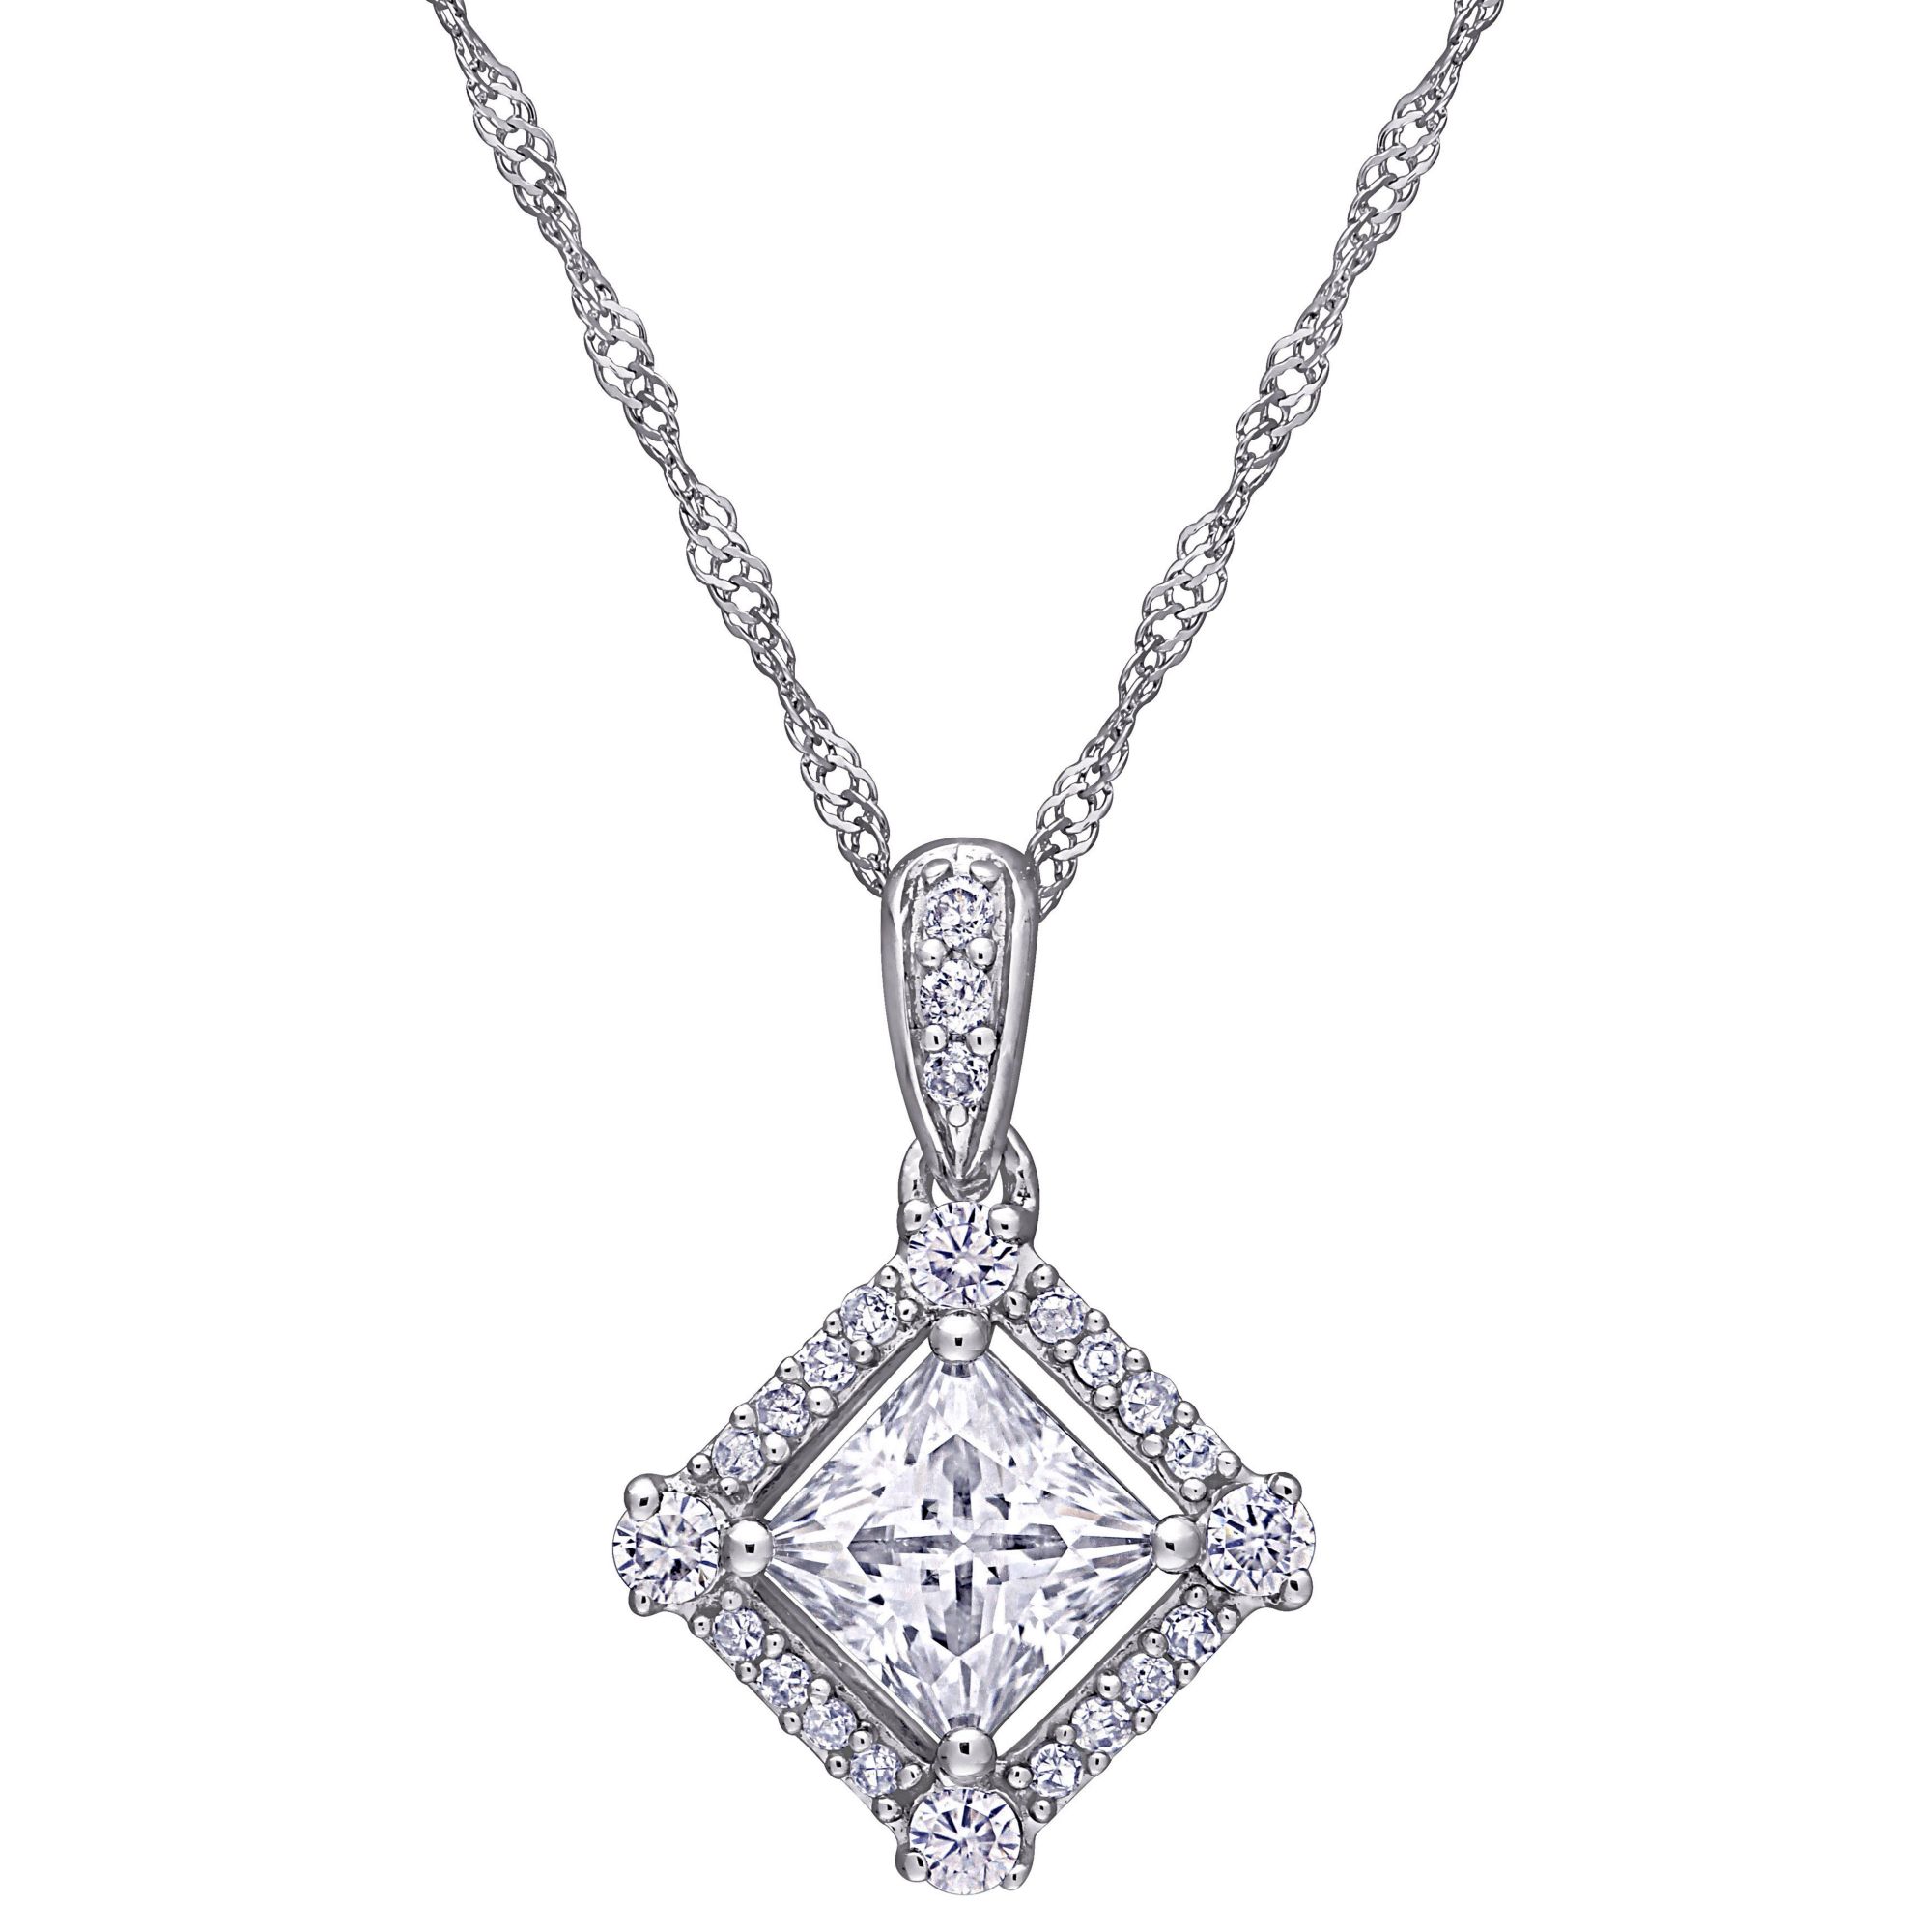 1 ct. t.g.w. Moissanite and 1/10 ct. TW Diamond Princess-Cut Halo Pendant with Chain in 10k White Gold